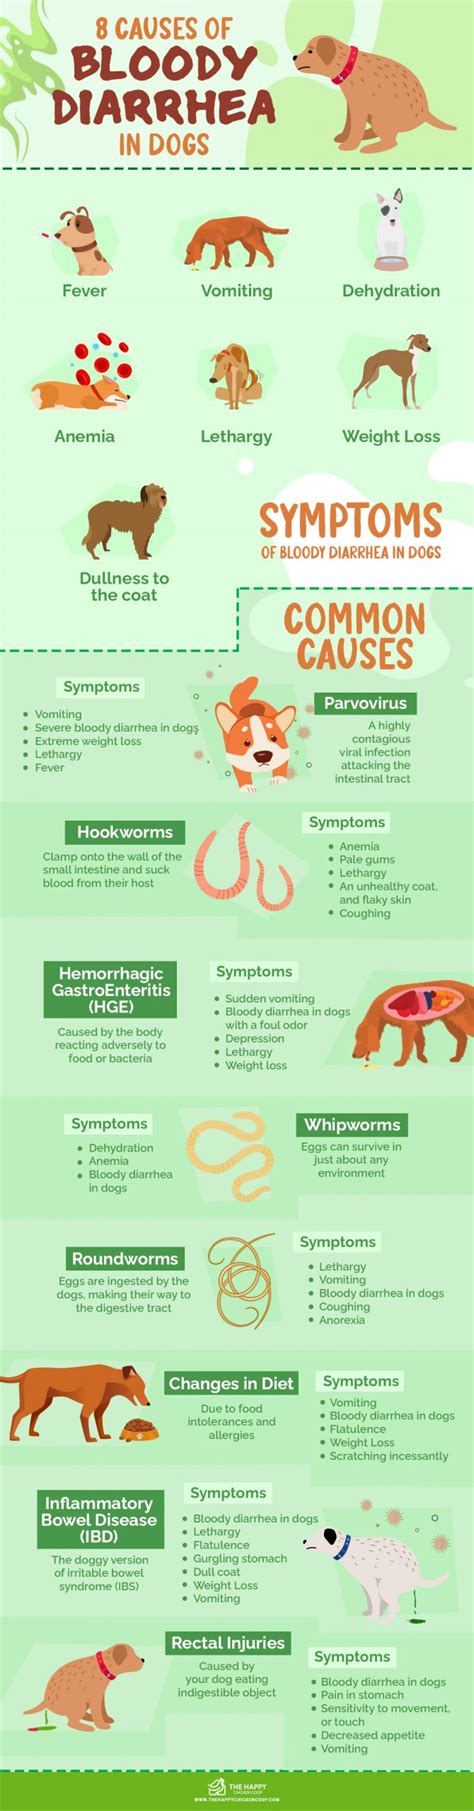 8 Causes Of Bloody Diarrhea In Dogs Best Treatments And A Case Study